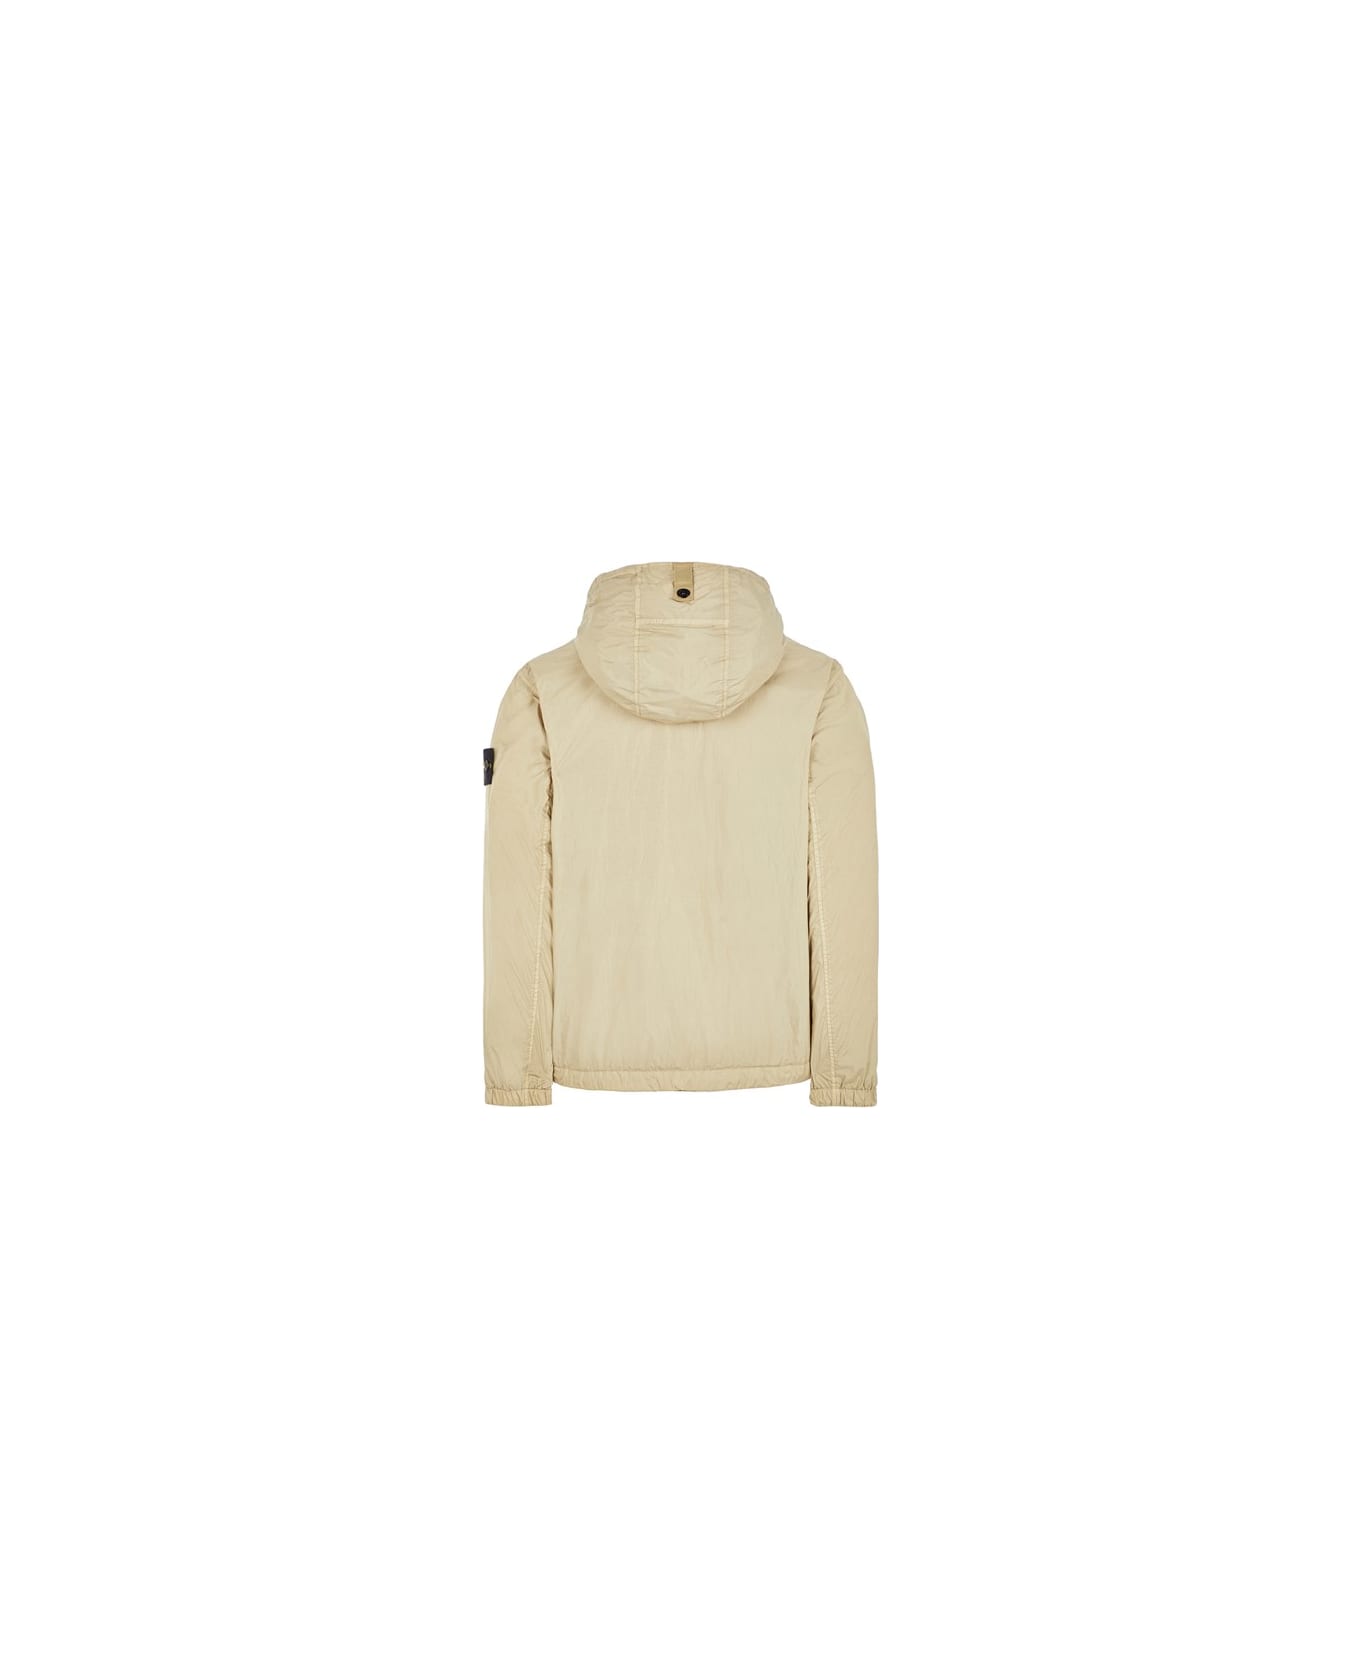 Stone Island Garment Dyed Crinkle Reps Jacket - Nude & Neutrals